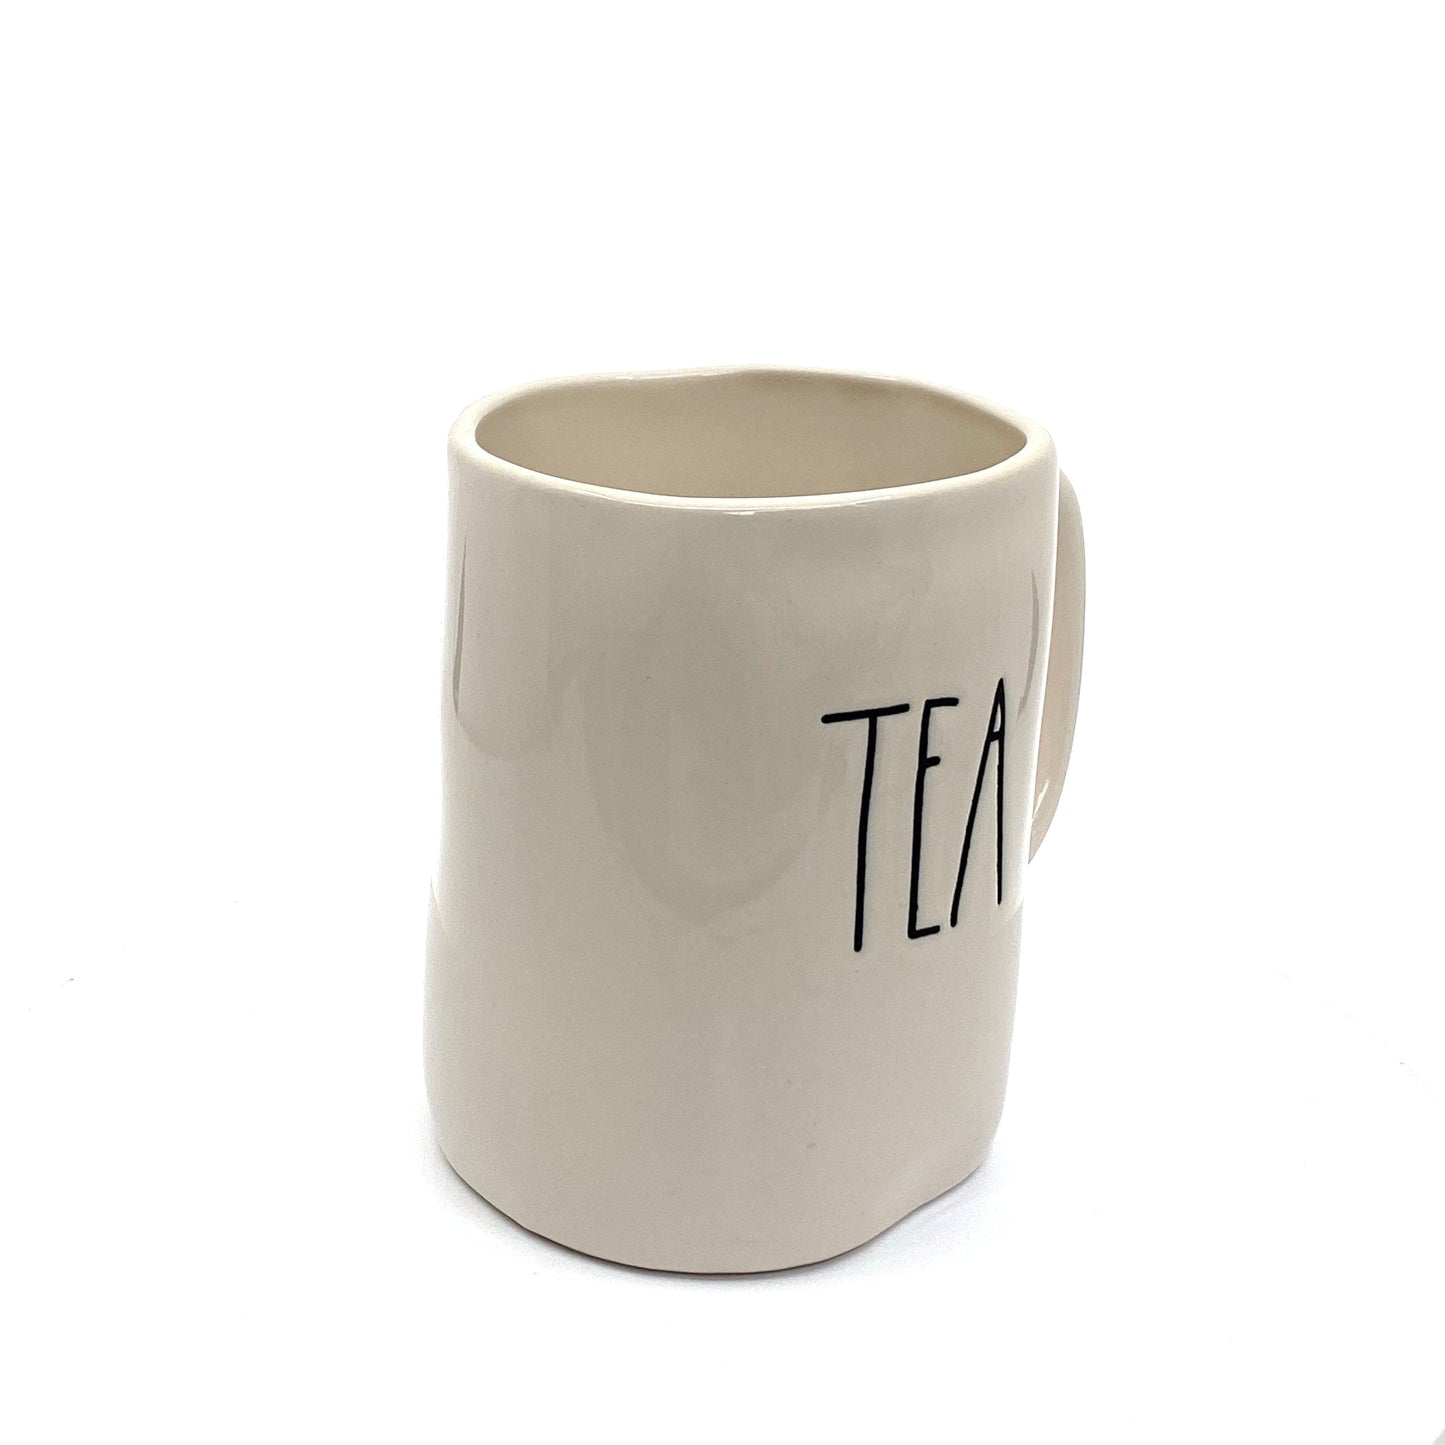 Rae Dunn Artisan Collection ‘TEA’ Large Letter White Coffee Cup Mug By Magenta